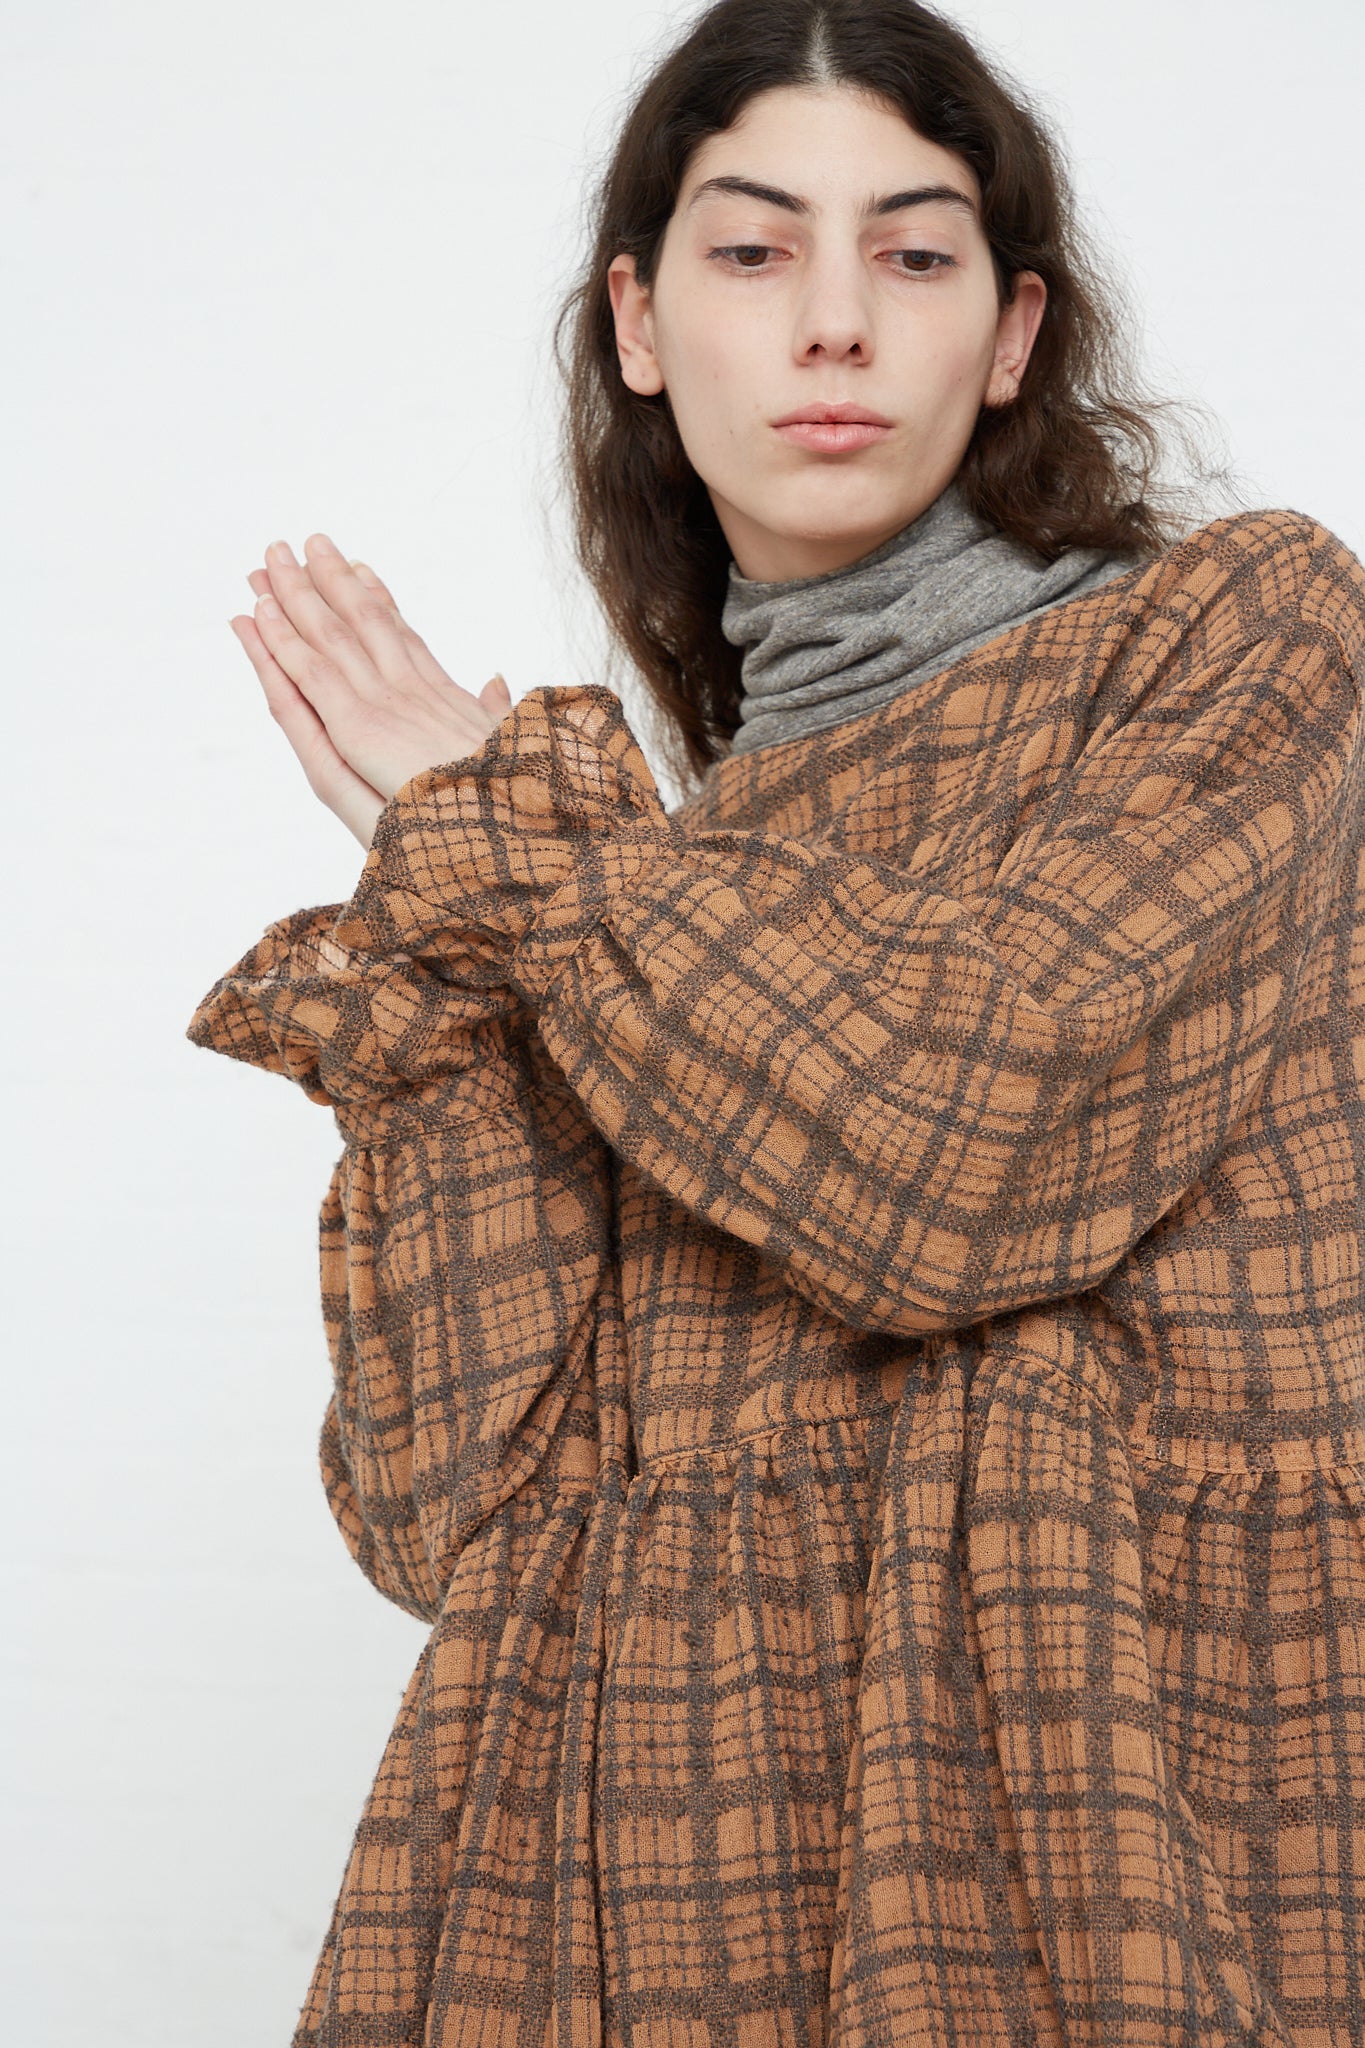 The model is wearing the Ichi Antiquités Woven Wool Check Dress in Terracotta.